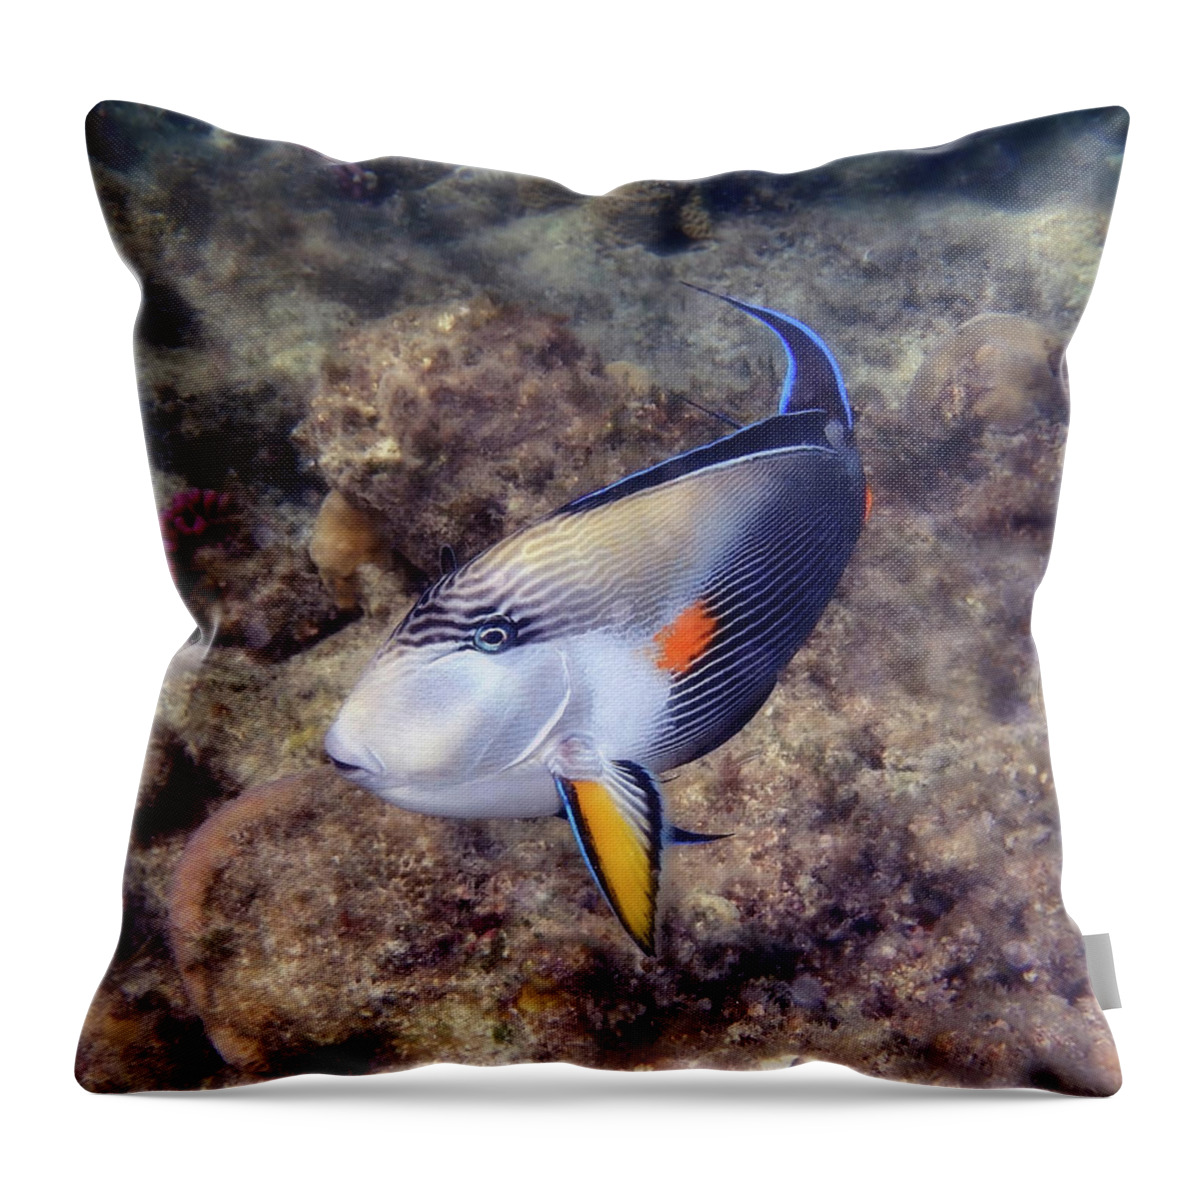 Underwater Throw Pillow featuring the photograph Gorgeous Red Sea Sohal Surgeonfish by Johanna Hurmerinta